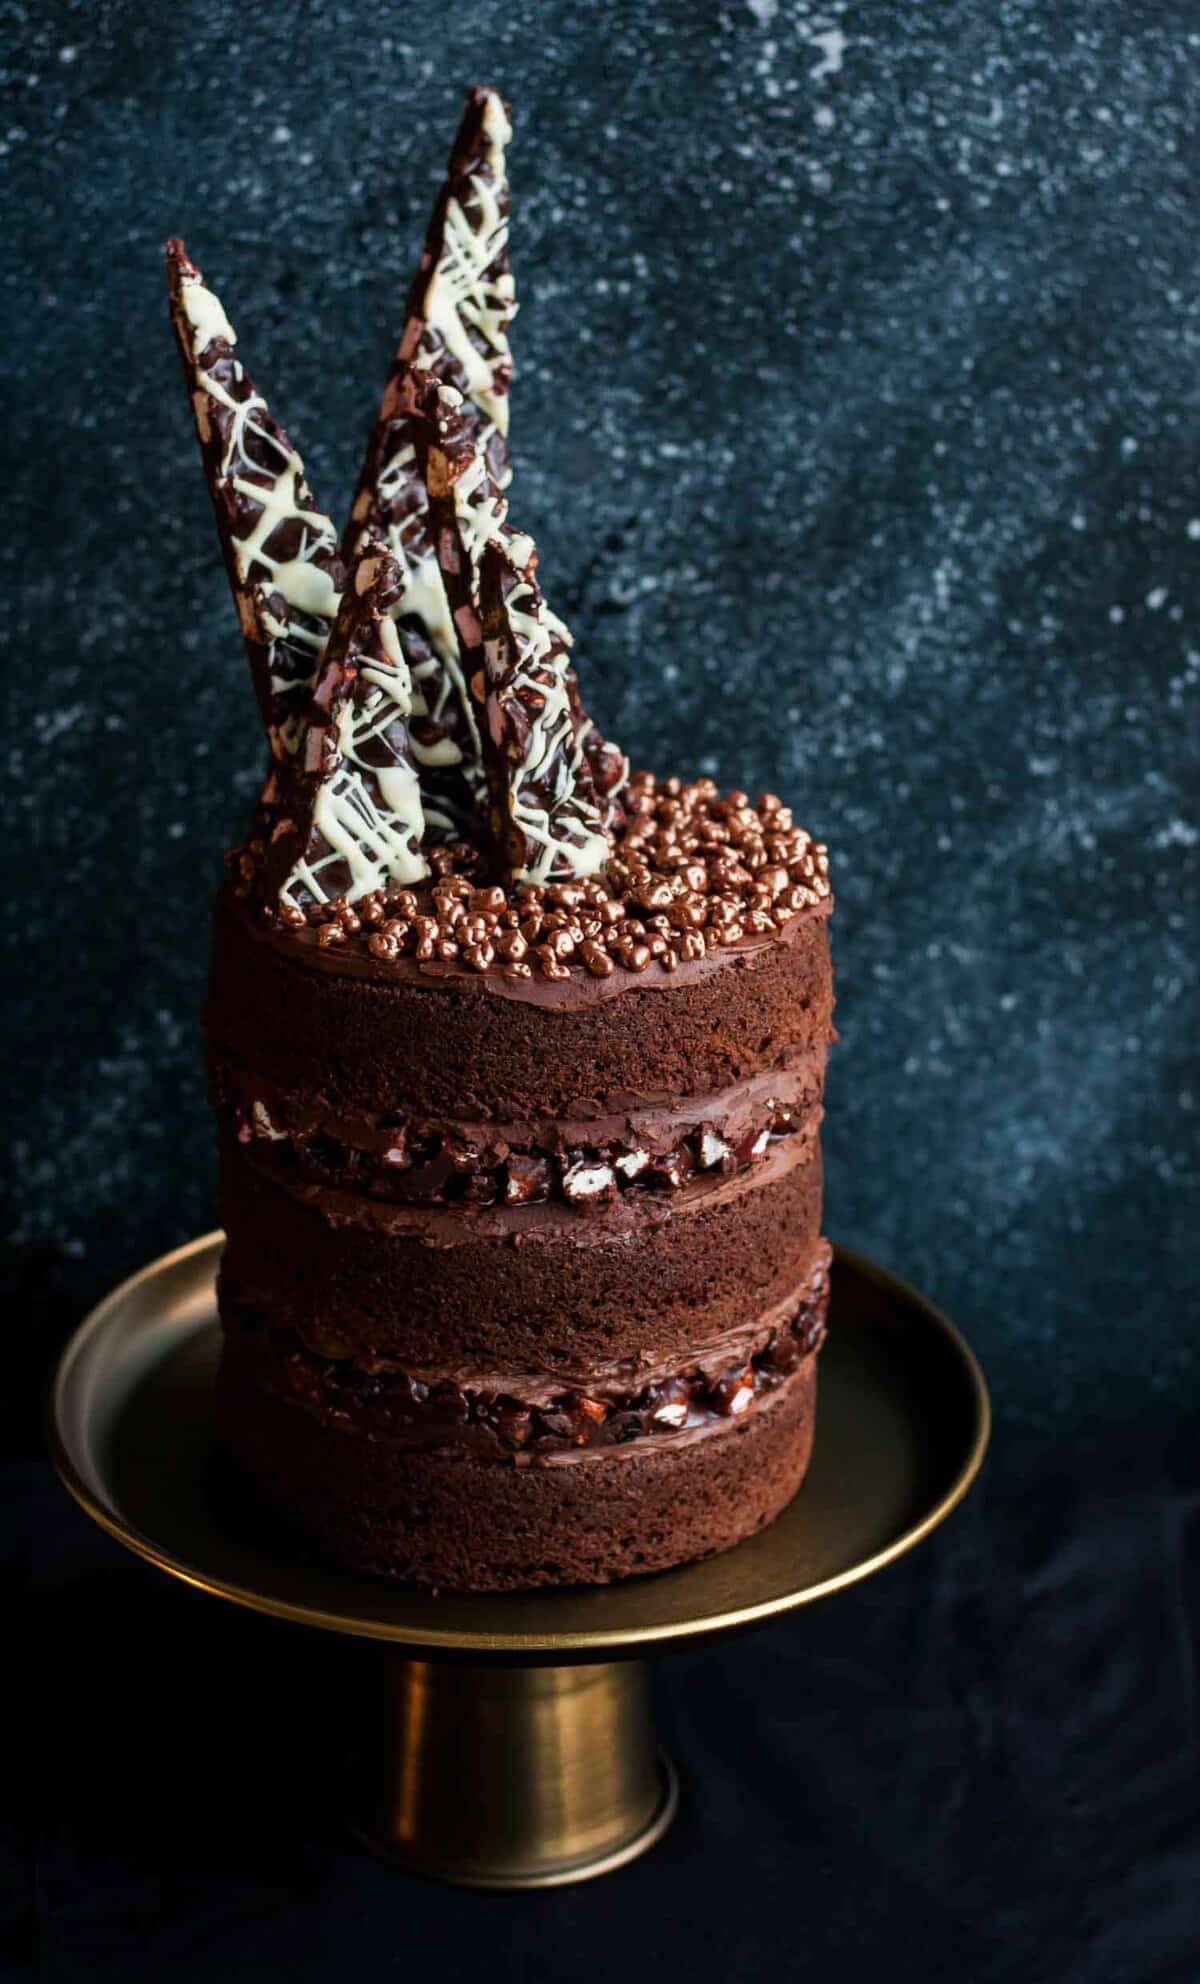 A close up of a triple layer rocky road cake on a golden cake stand.